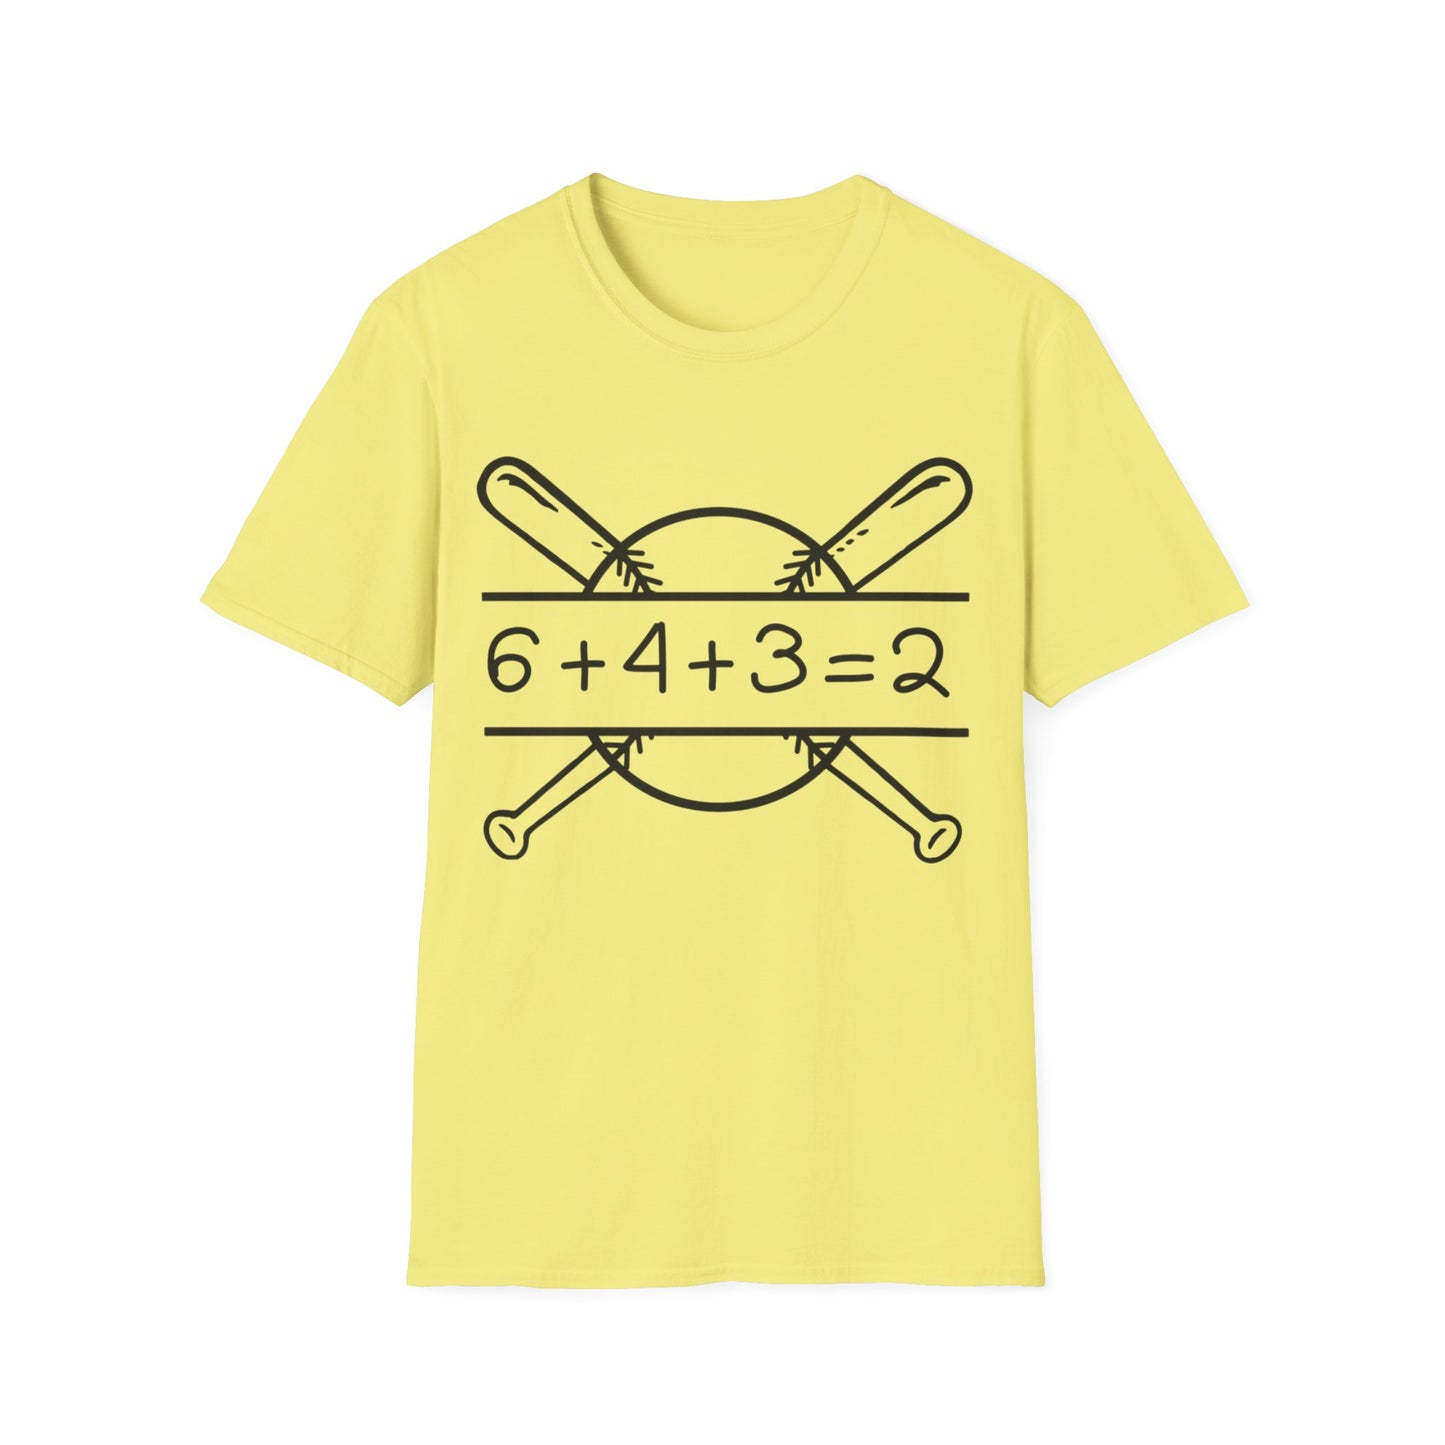 Double Play - Unisex Softstyle T-Shirt